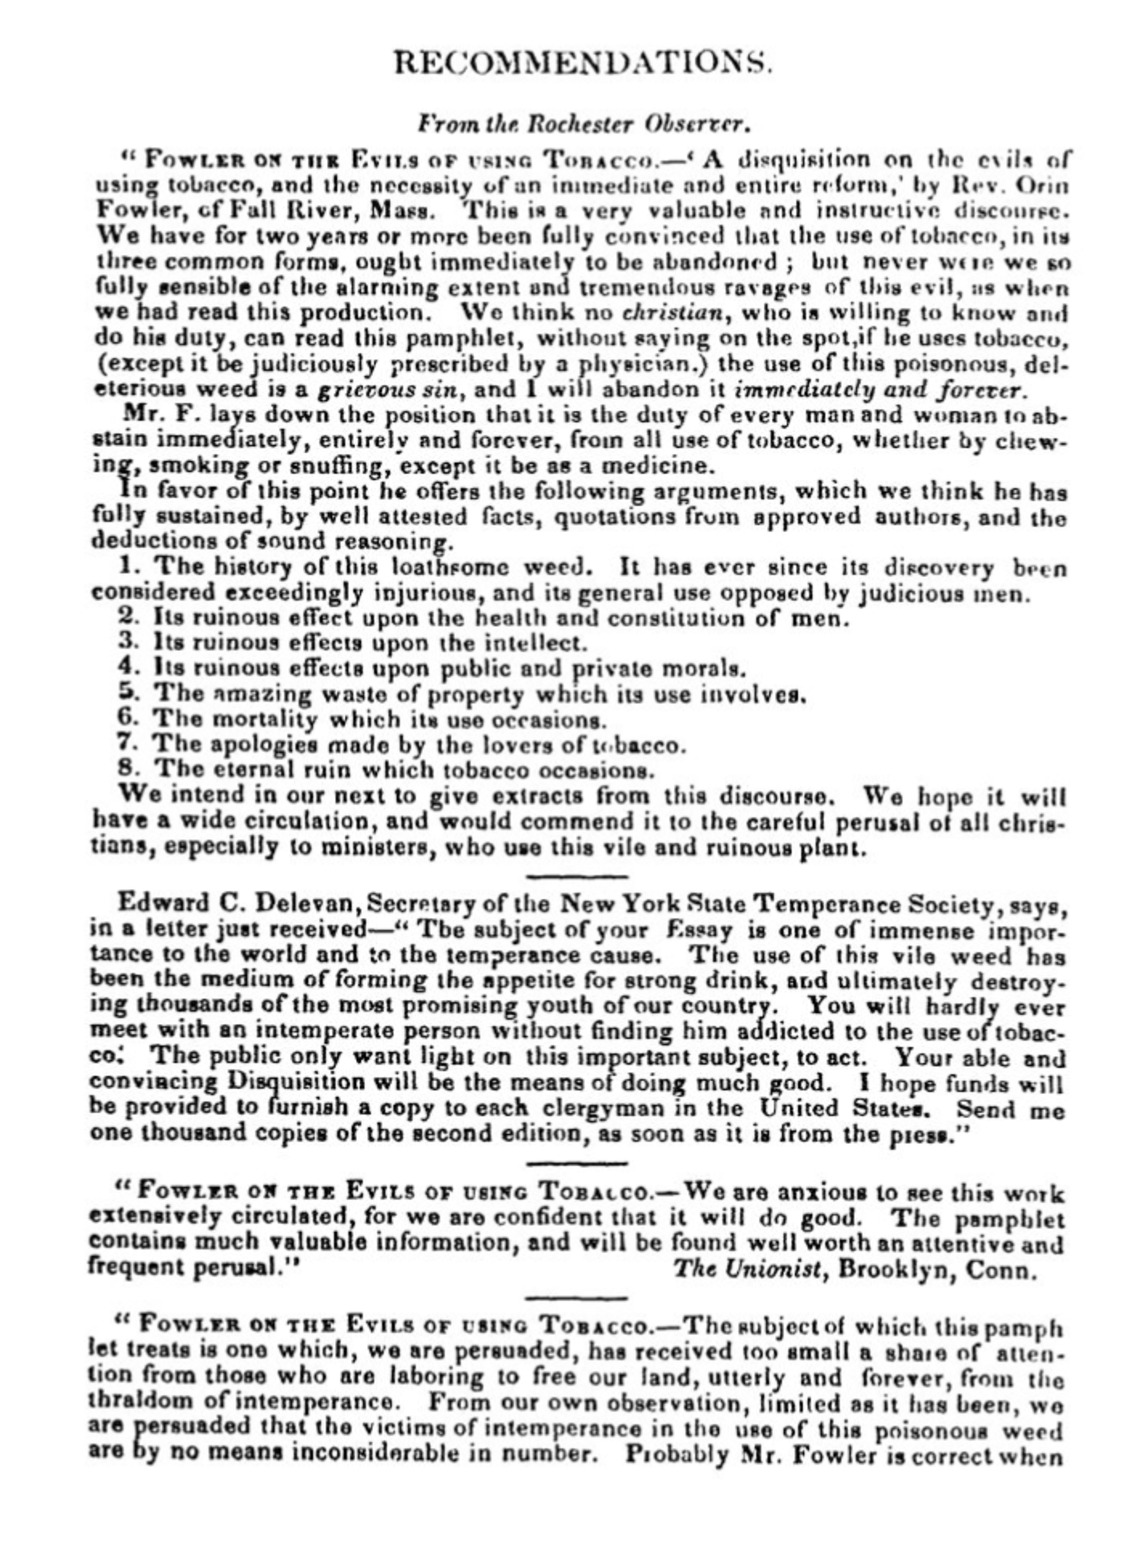 Endorsement page with testimony of <em>The Unionist</em> for Orin Fowler's <em>A Disquisition on the Evils of Using Tobacco</em>